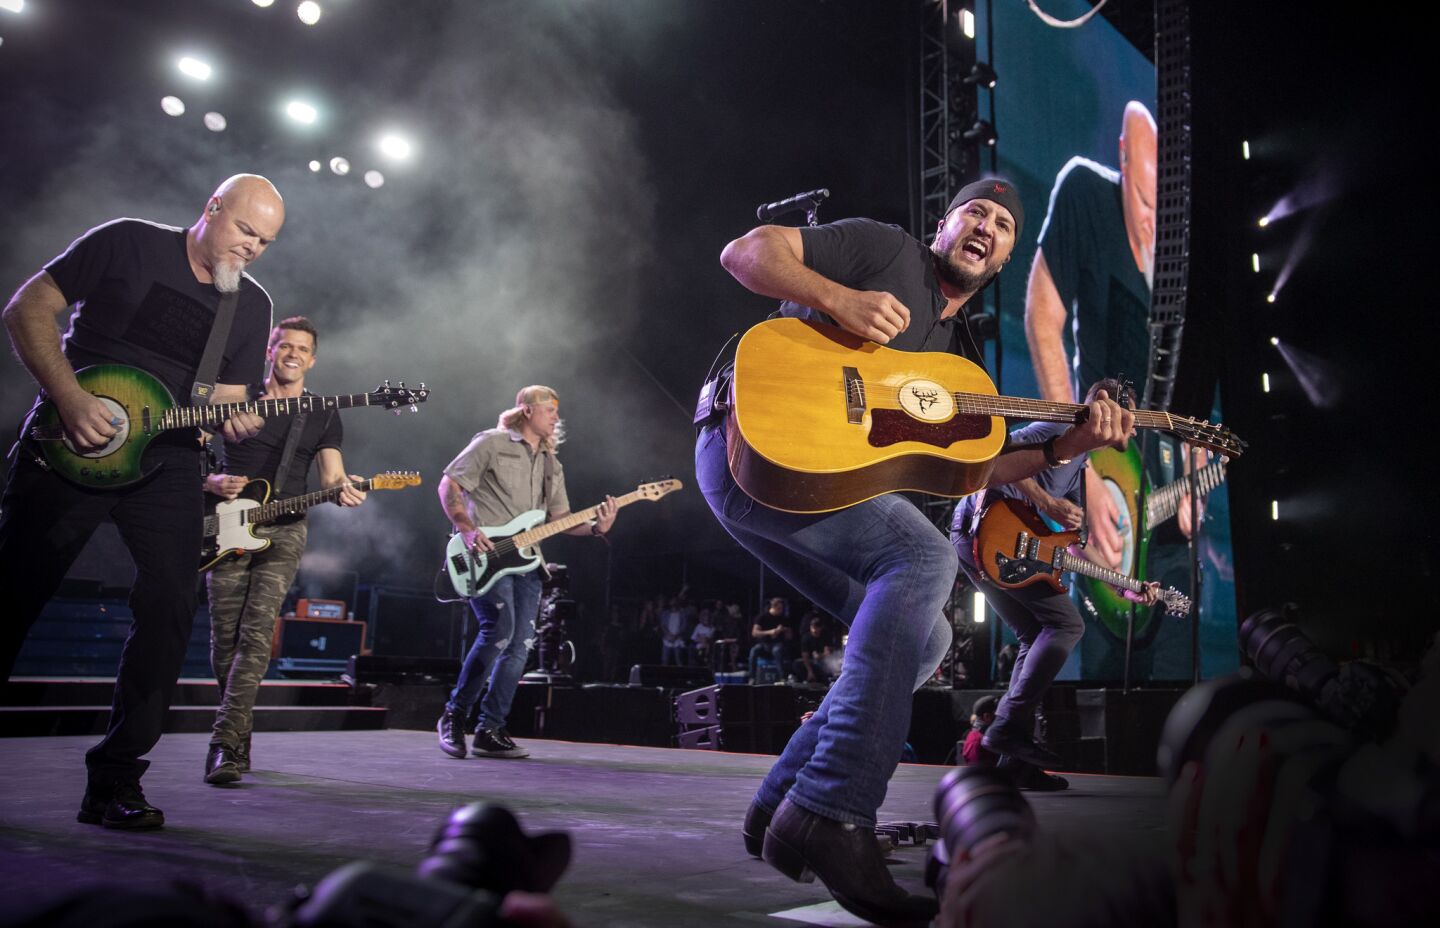 Luke Bryan and his band perform on the Mane Stage as he headlines the first day of the three-day 2019 Stagecoach Country Music Festival.